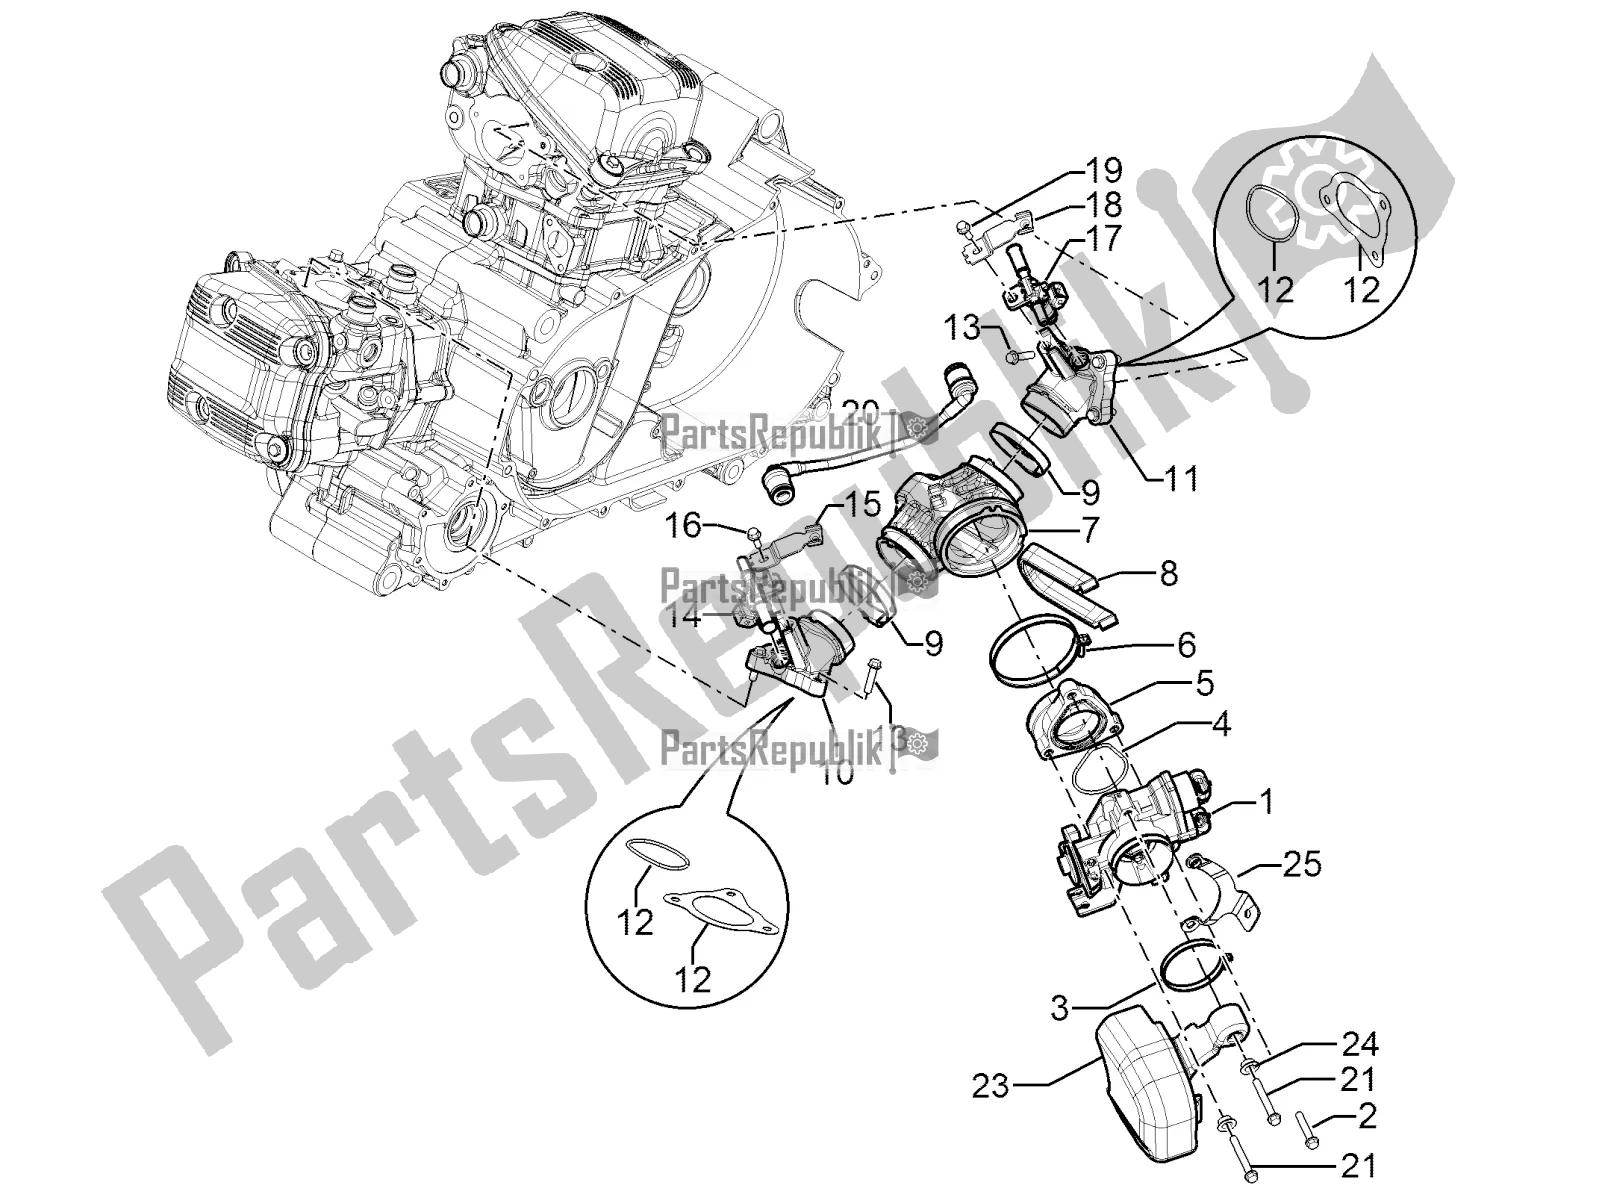 All parts for the Throttle Body - Injector - Induction Joint of the Aprilia SRV 850 2016